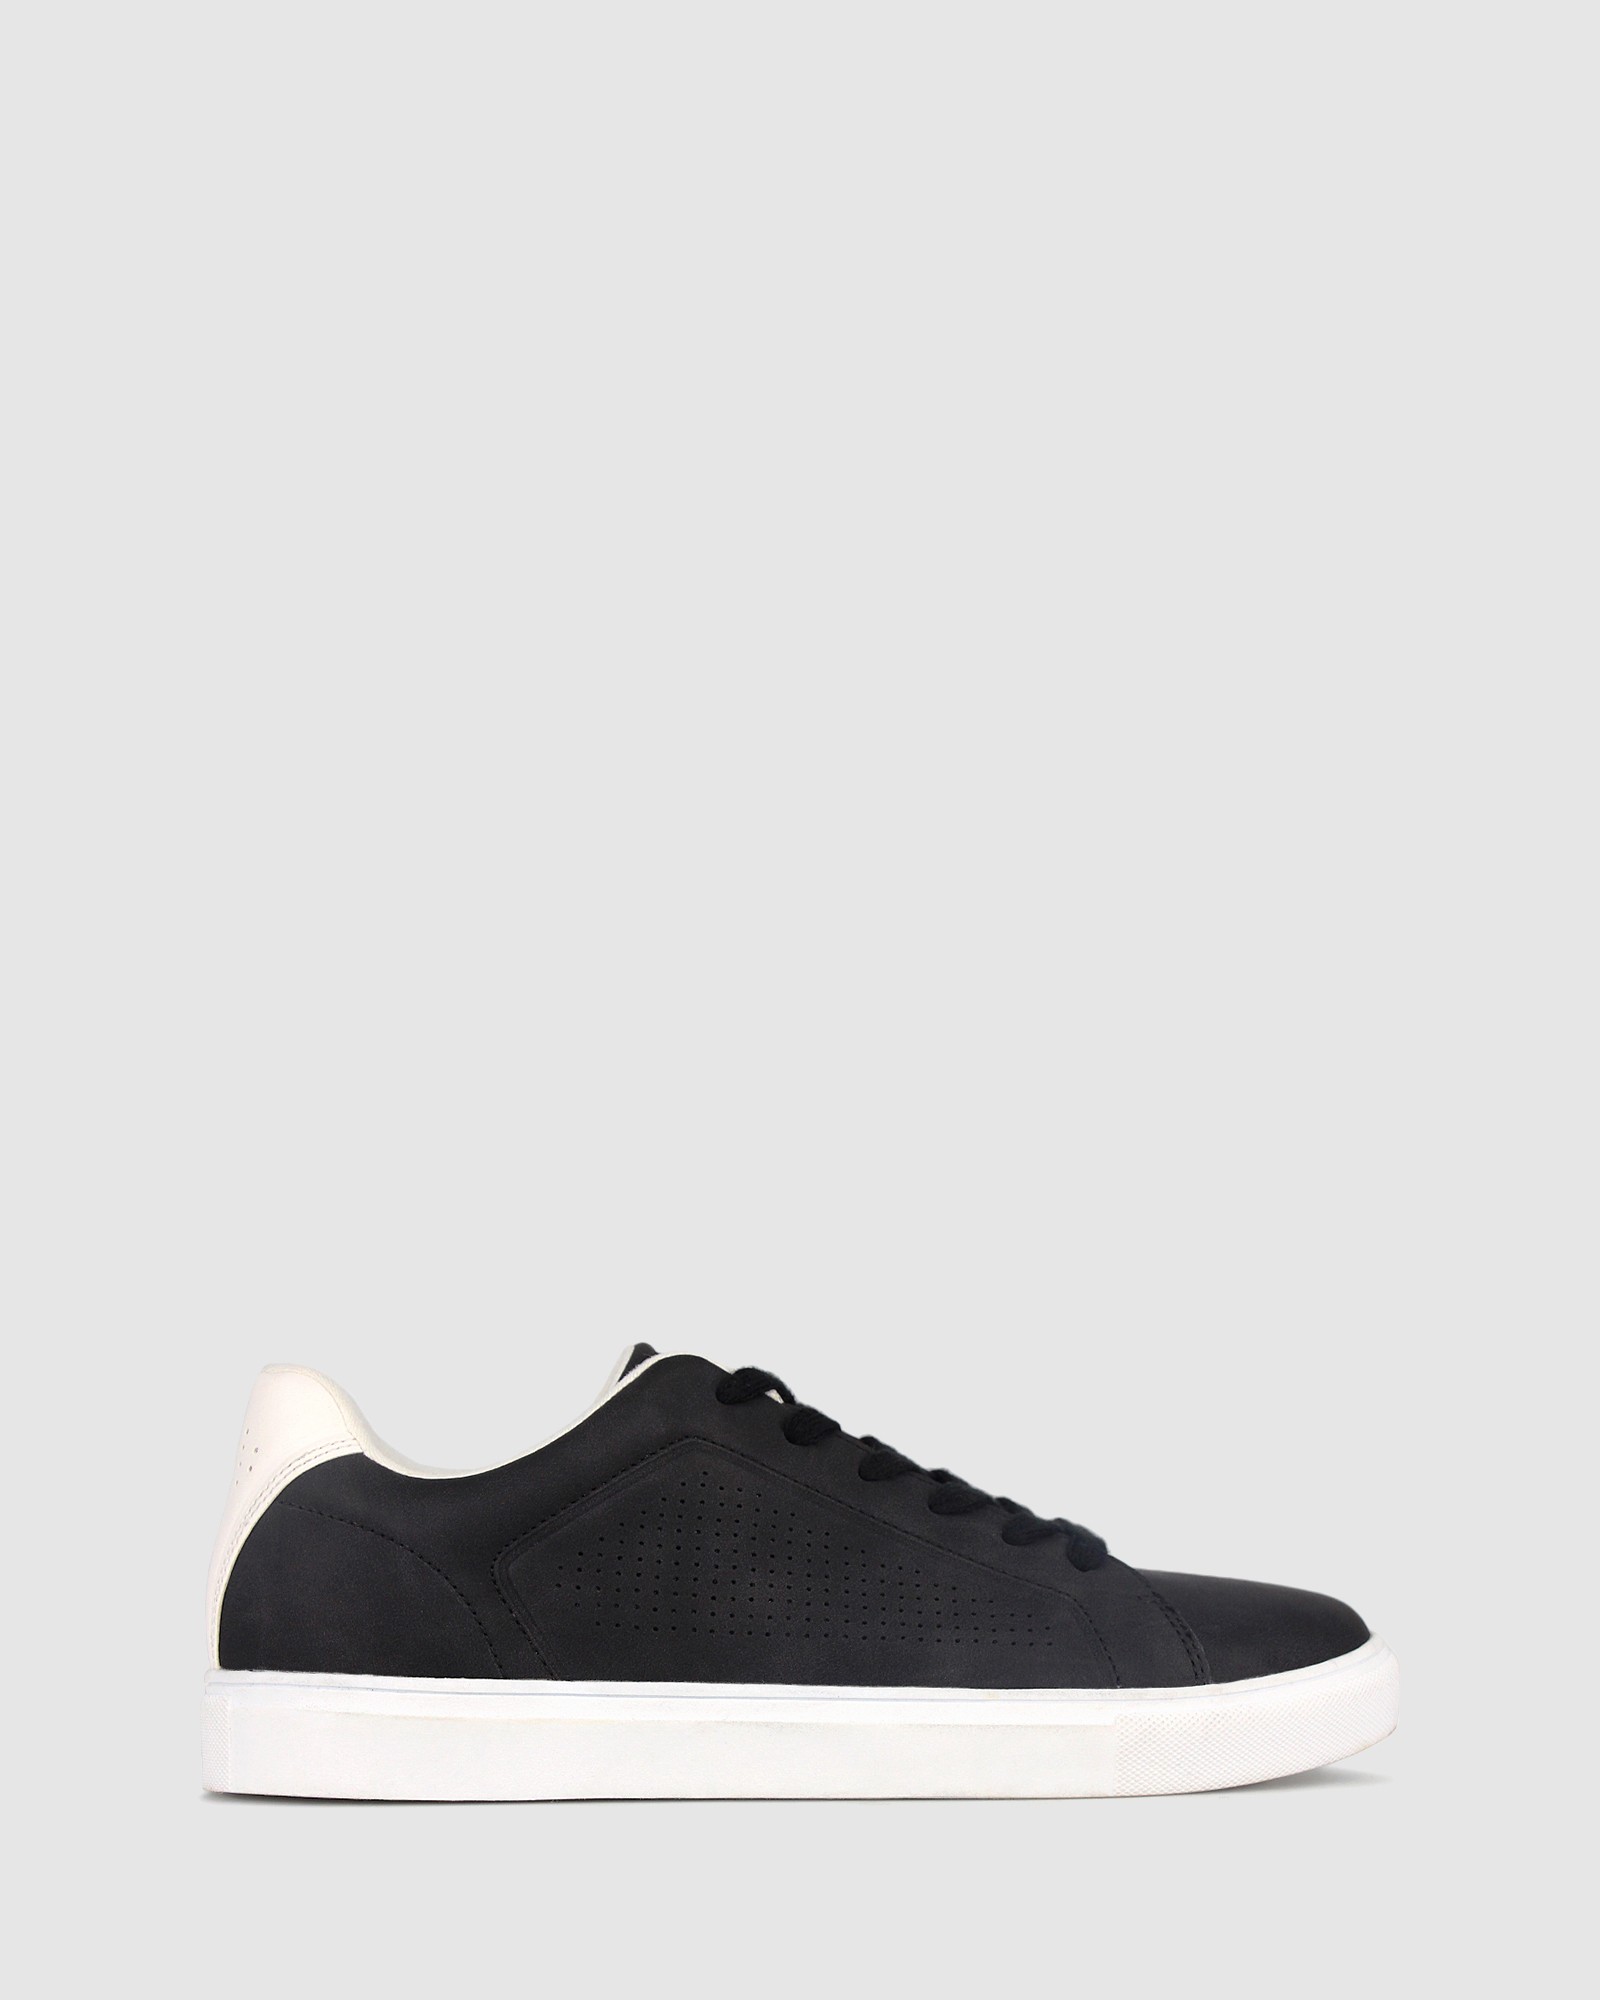 Charlie Lifestyle Sneakers Black by Betts | ShoeSales